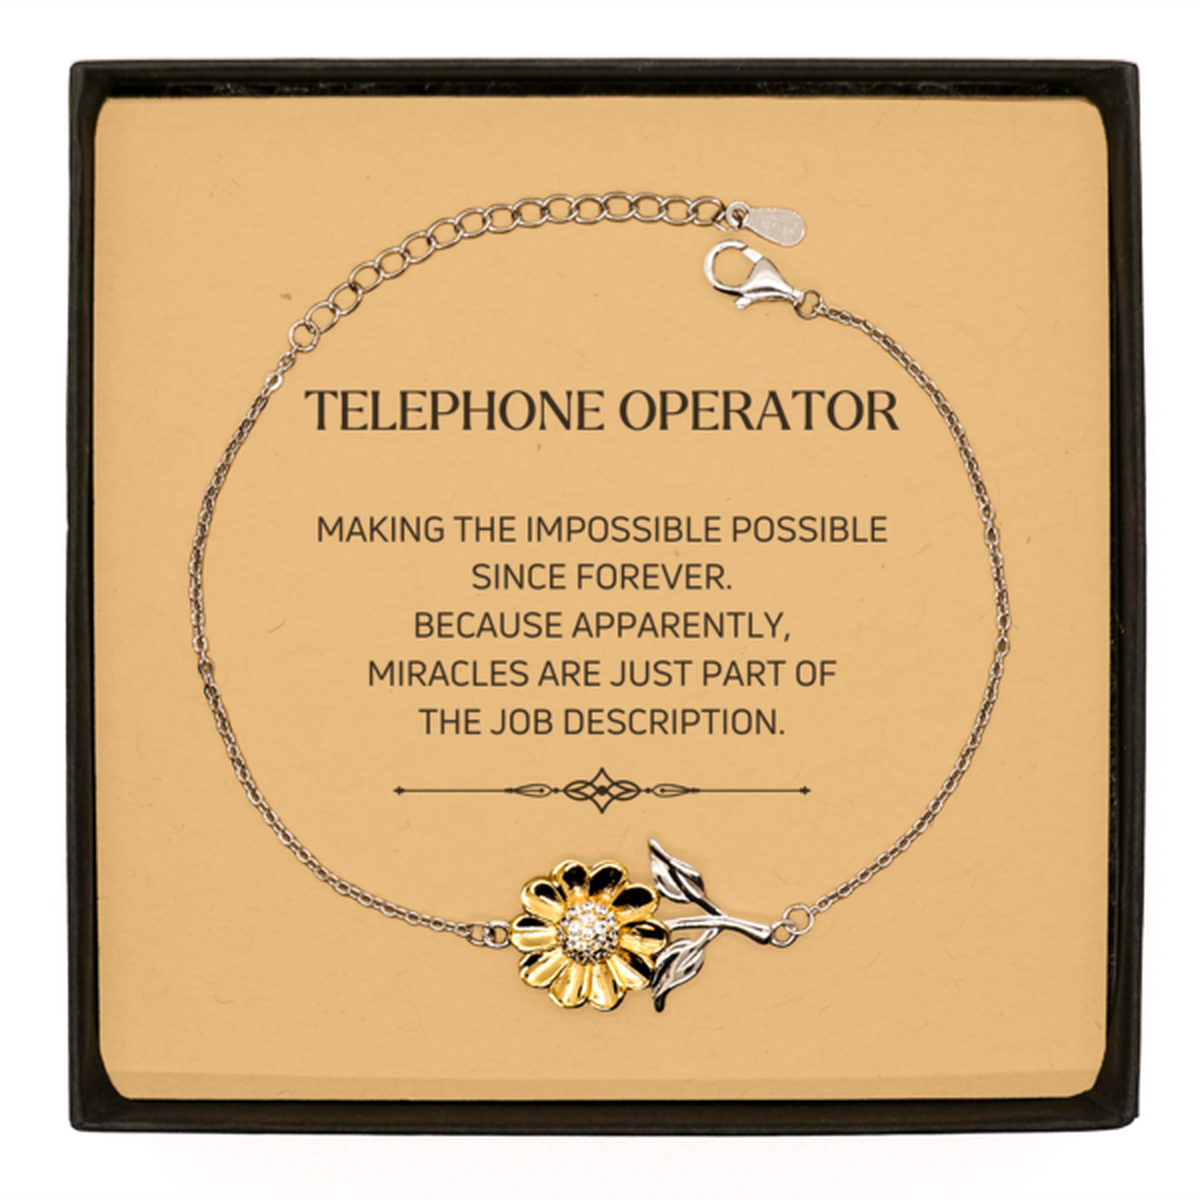 Funny Telephone Operator Gifts, Miracles are just part of the job description, Inspirational Birthday Sunflower Bracelet For Telephone Operator, Men, Women, Coworkers, Friends, Boss